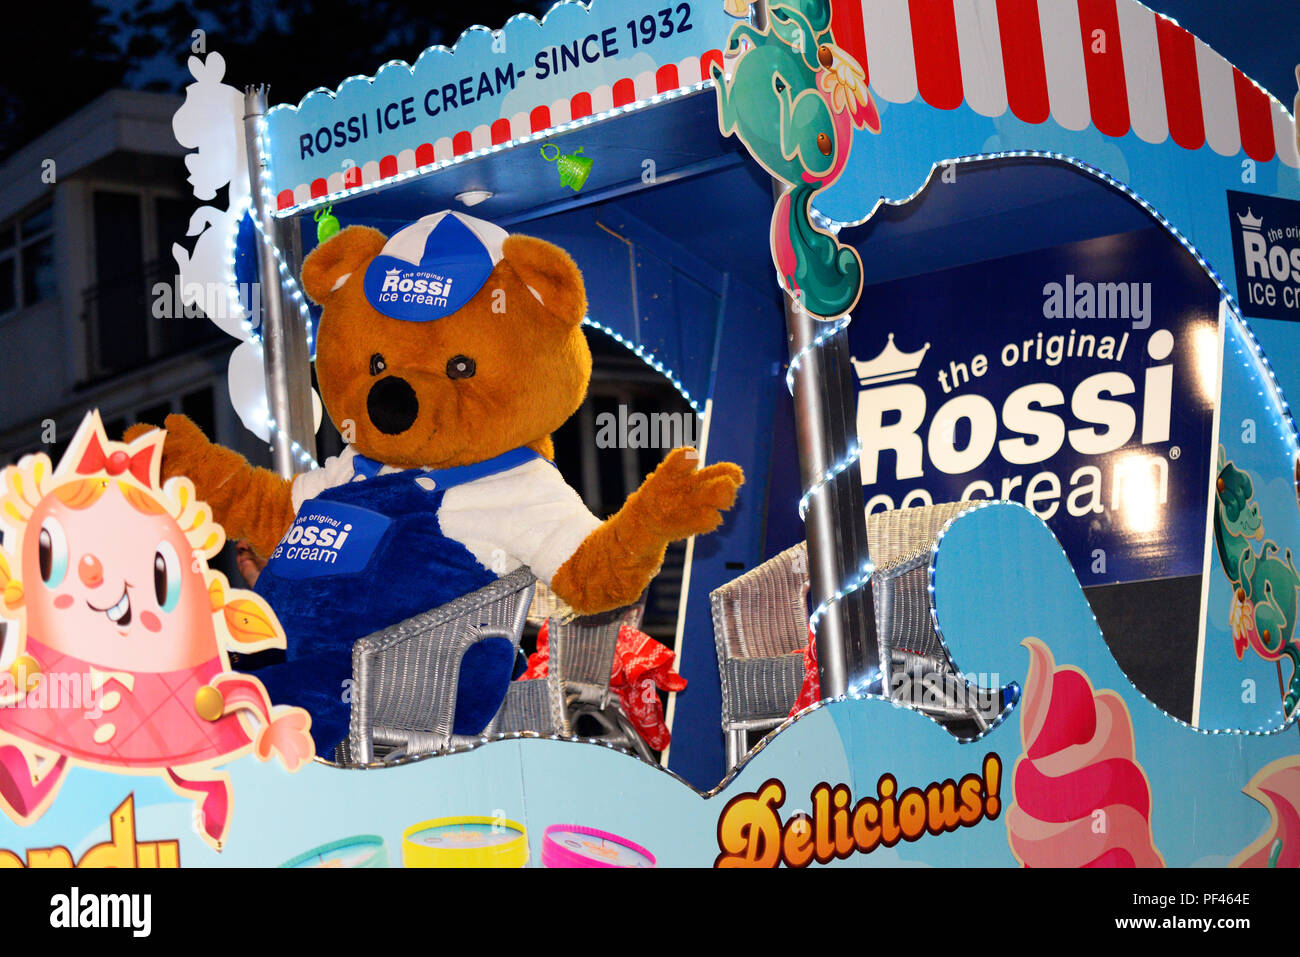 Southend SummerCare Carnival Procession. Southend on Sea, Essex, UK. Rossi ice cream bear in the carnival parade. Float Stock Photo